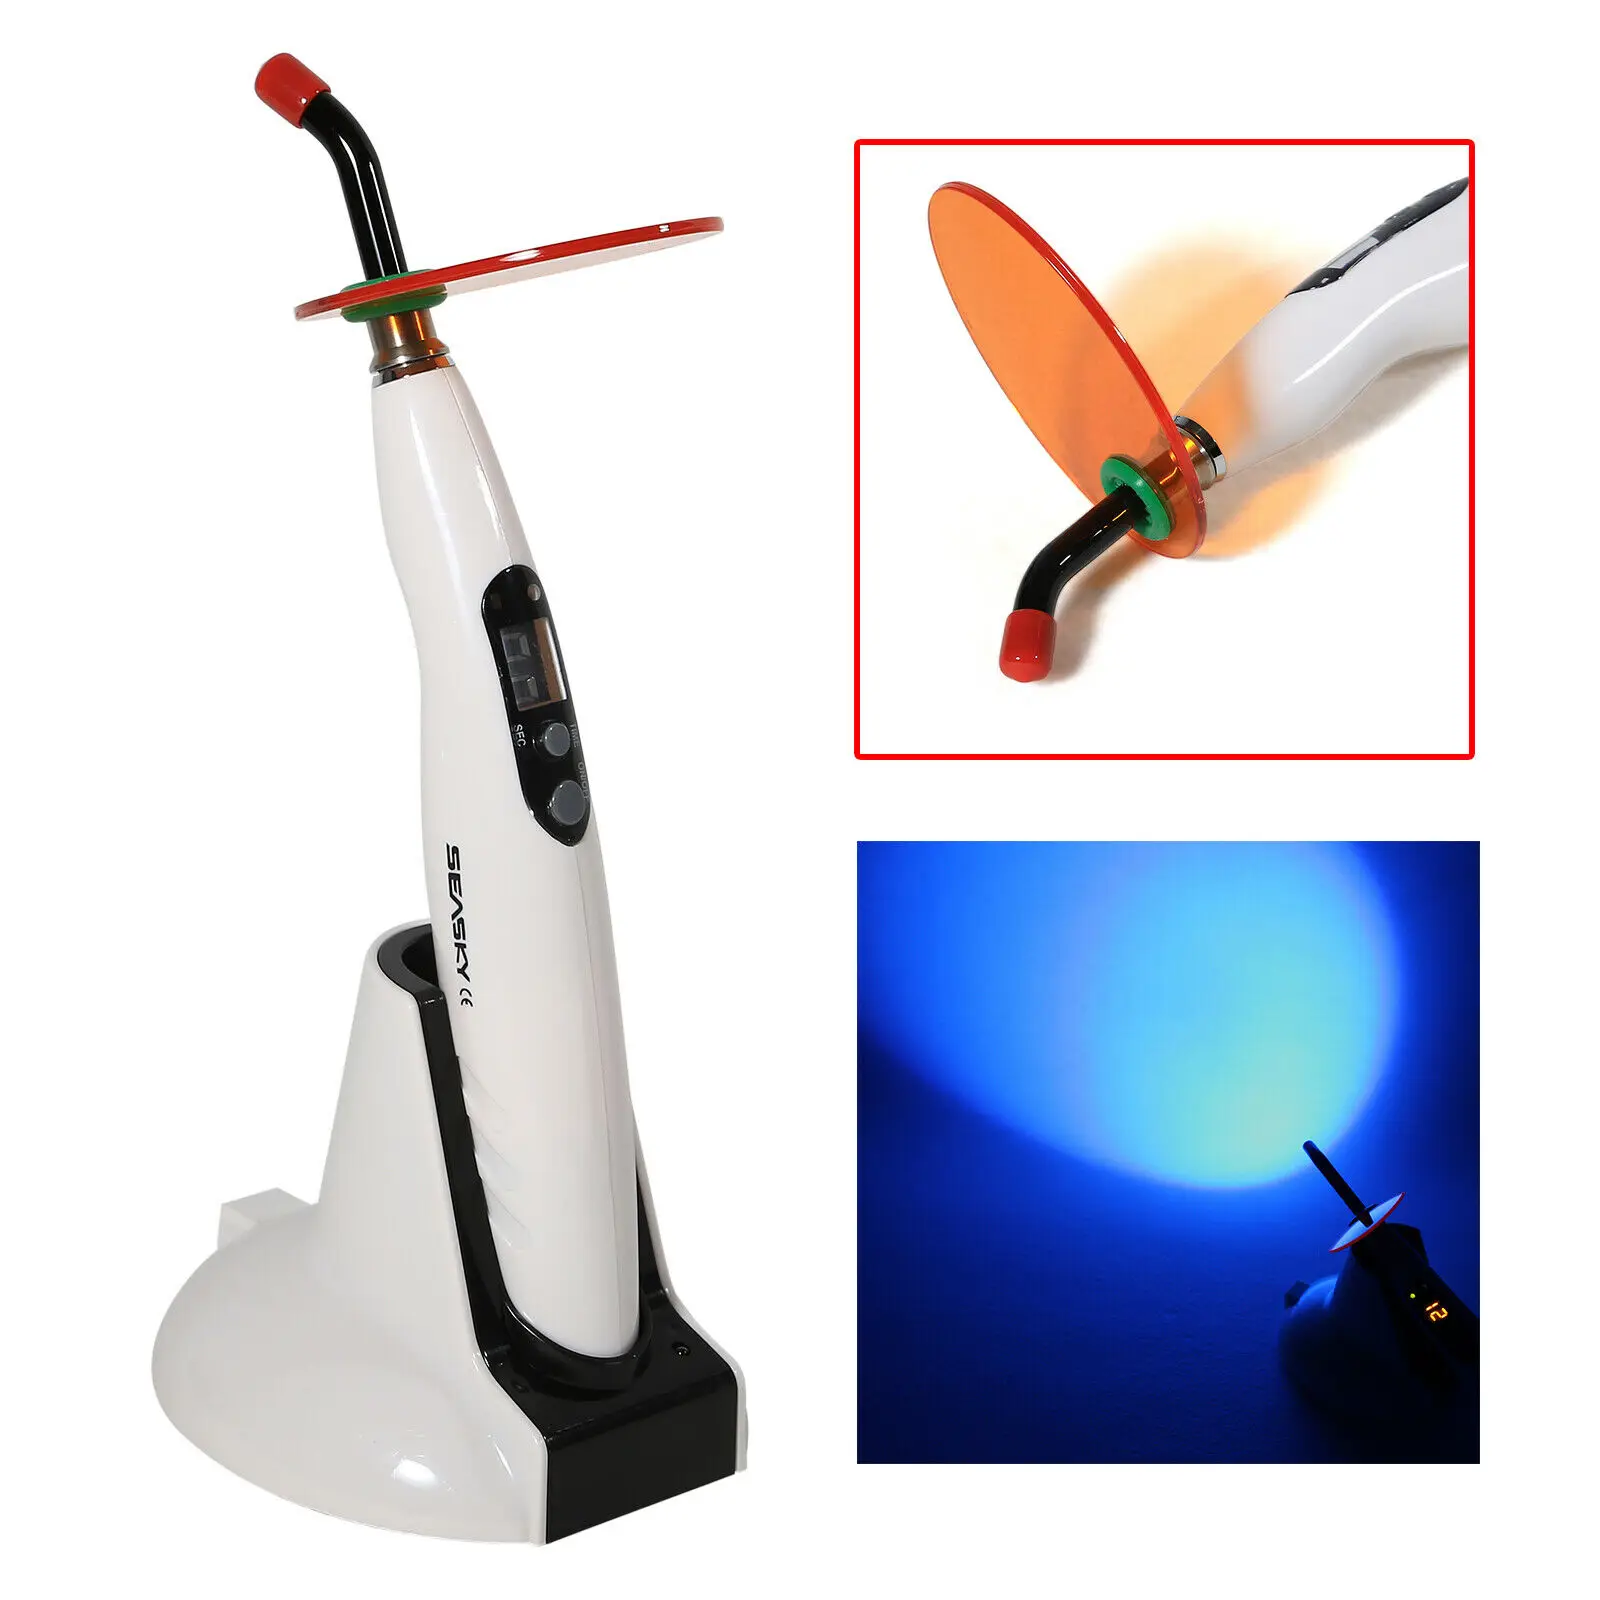 

Dental LED 5W Curing Light Cure Lamp1400mW/cm² Four Working Modes LED-B Wireless Cordless Composite Resin Woodpecker Style